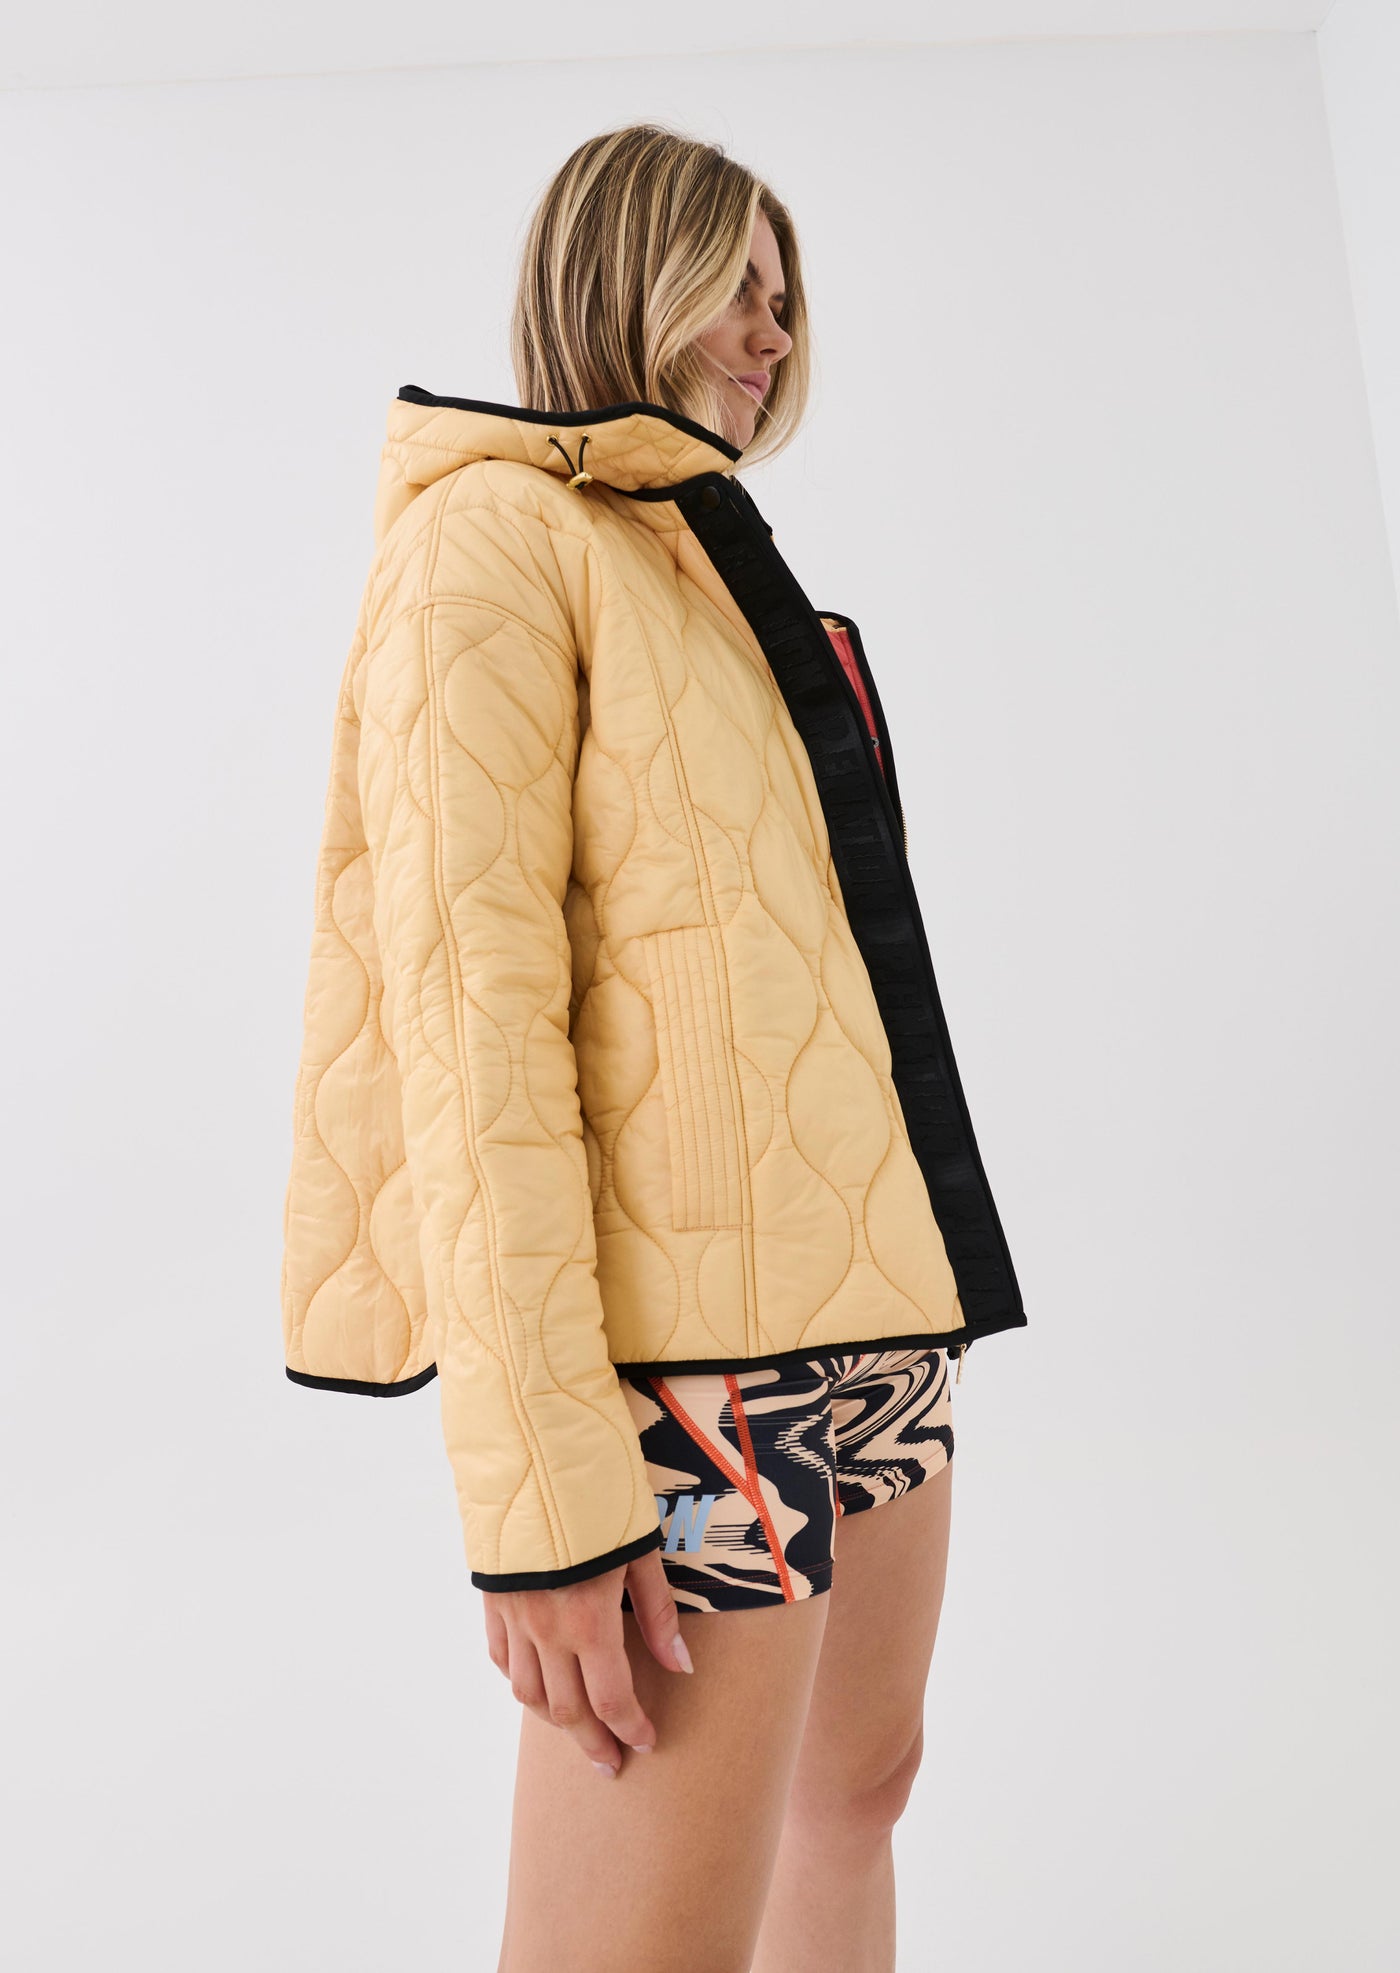 ADVOCATE JACKET IN APRICOT SHERBET